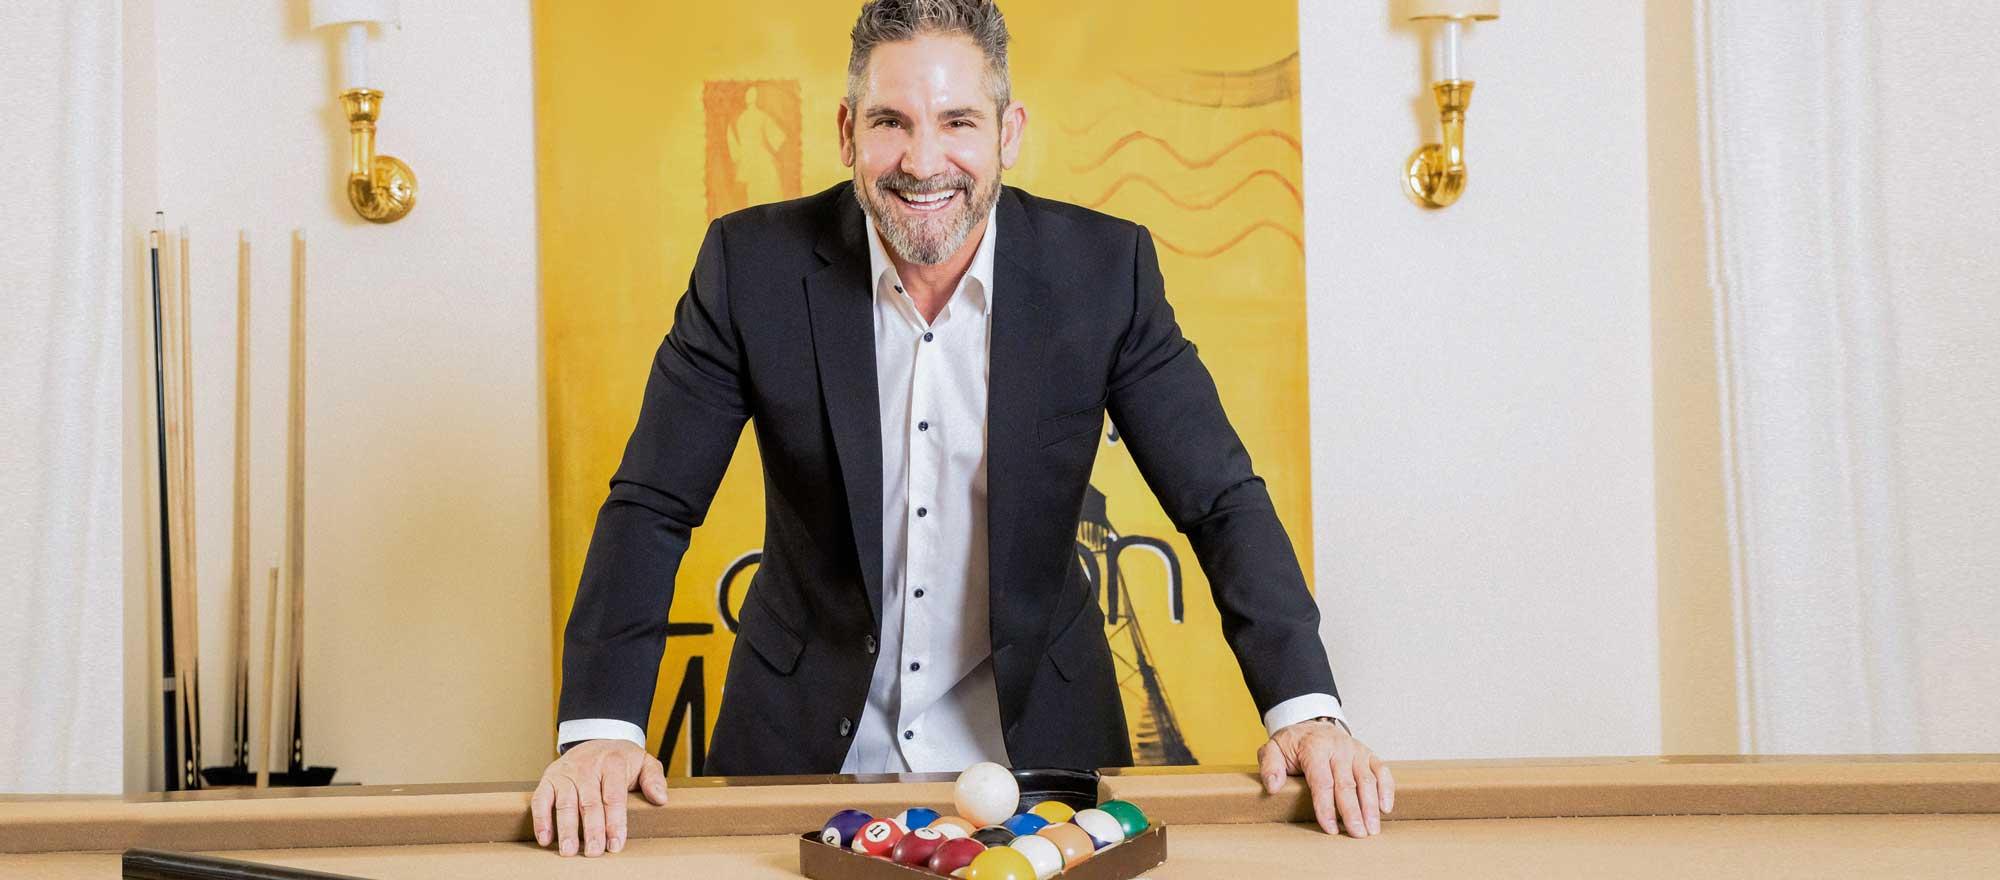 Grant Cardone smiling and leaning over a pool table'